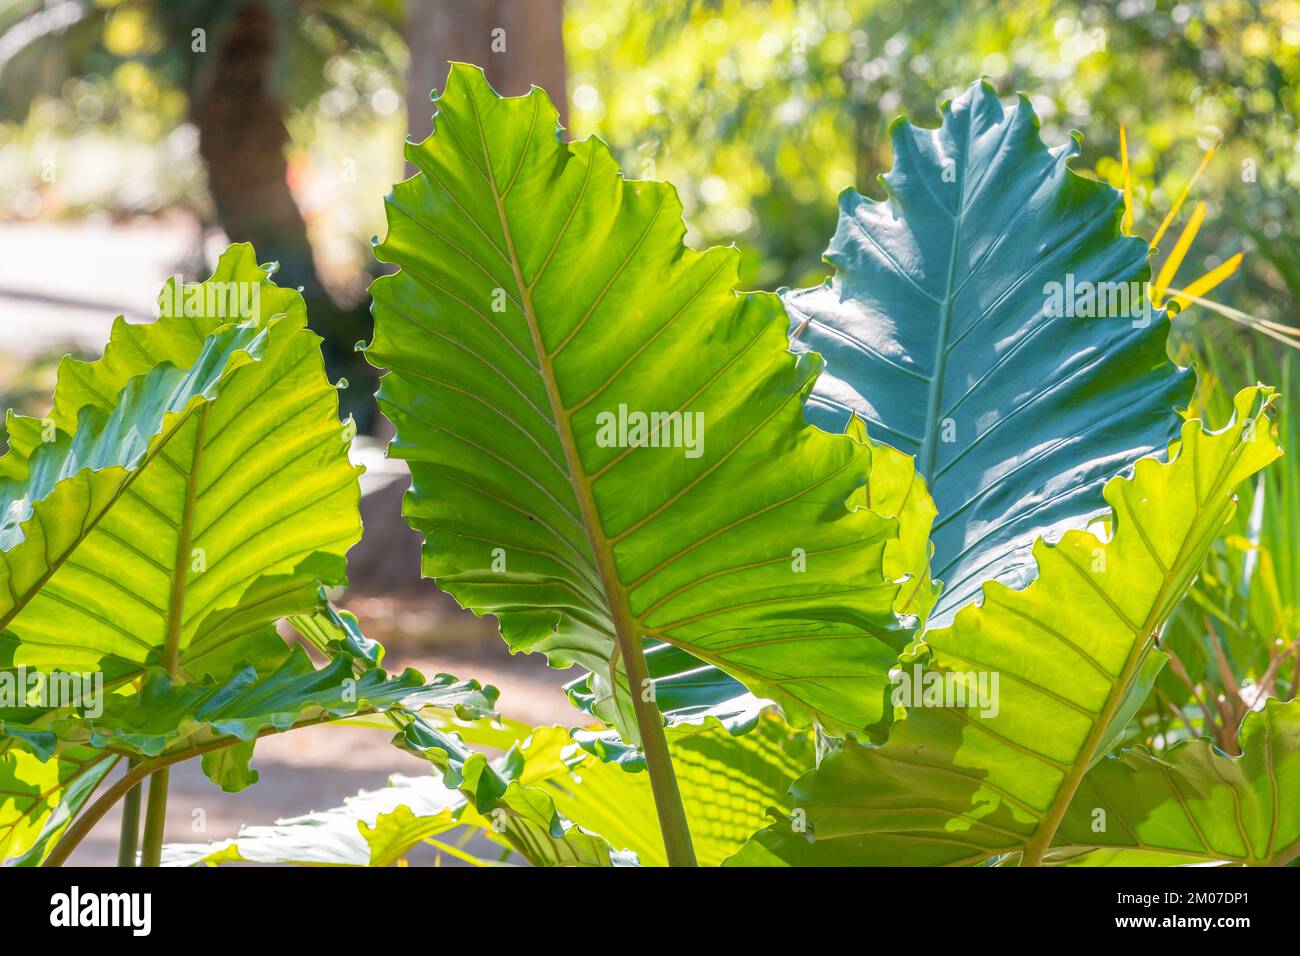 The enormous leaves of the elephant ear plant will attract attention in any garden. Stock Photo